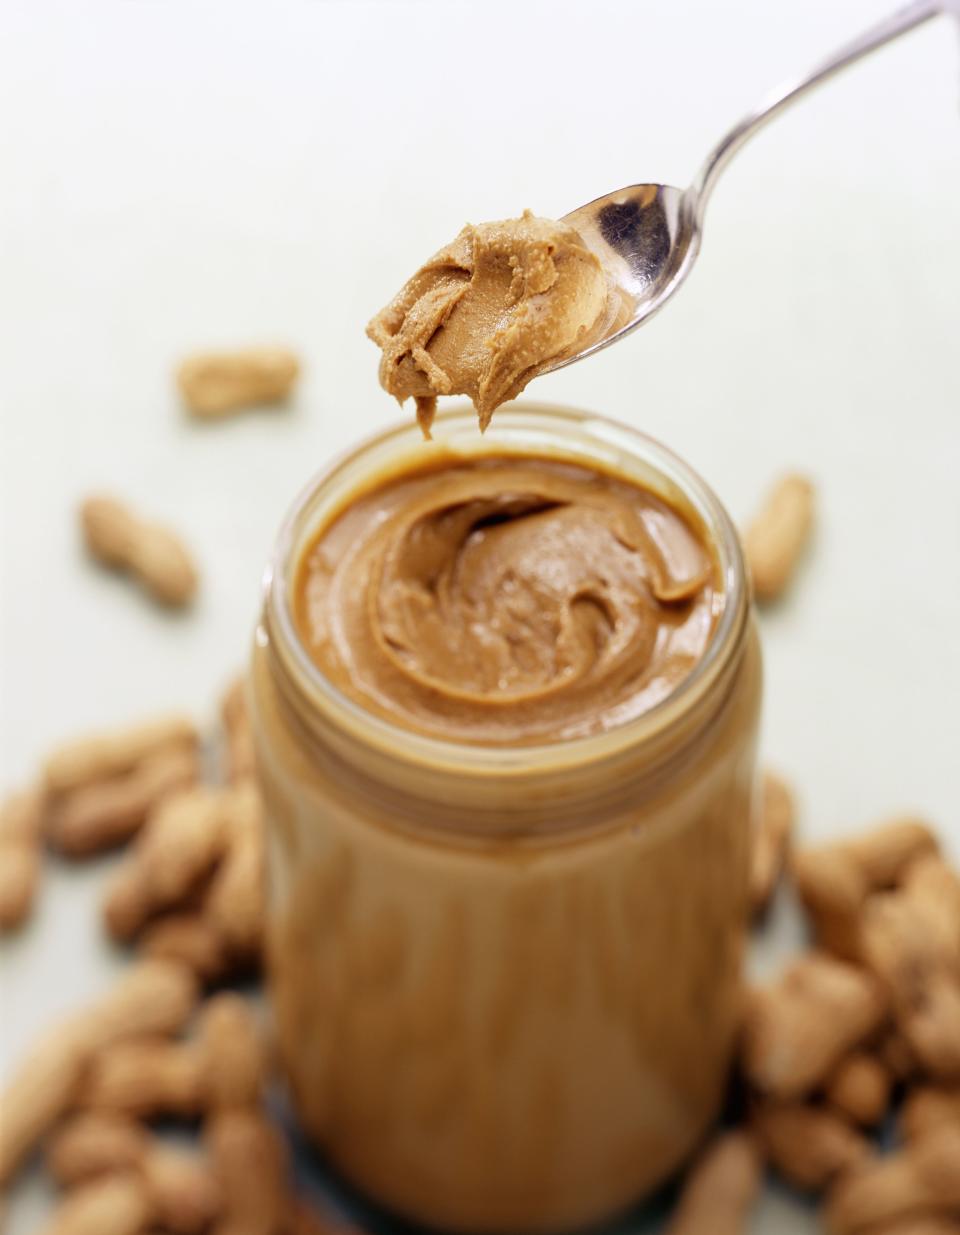 Have a spoonful of PB